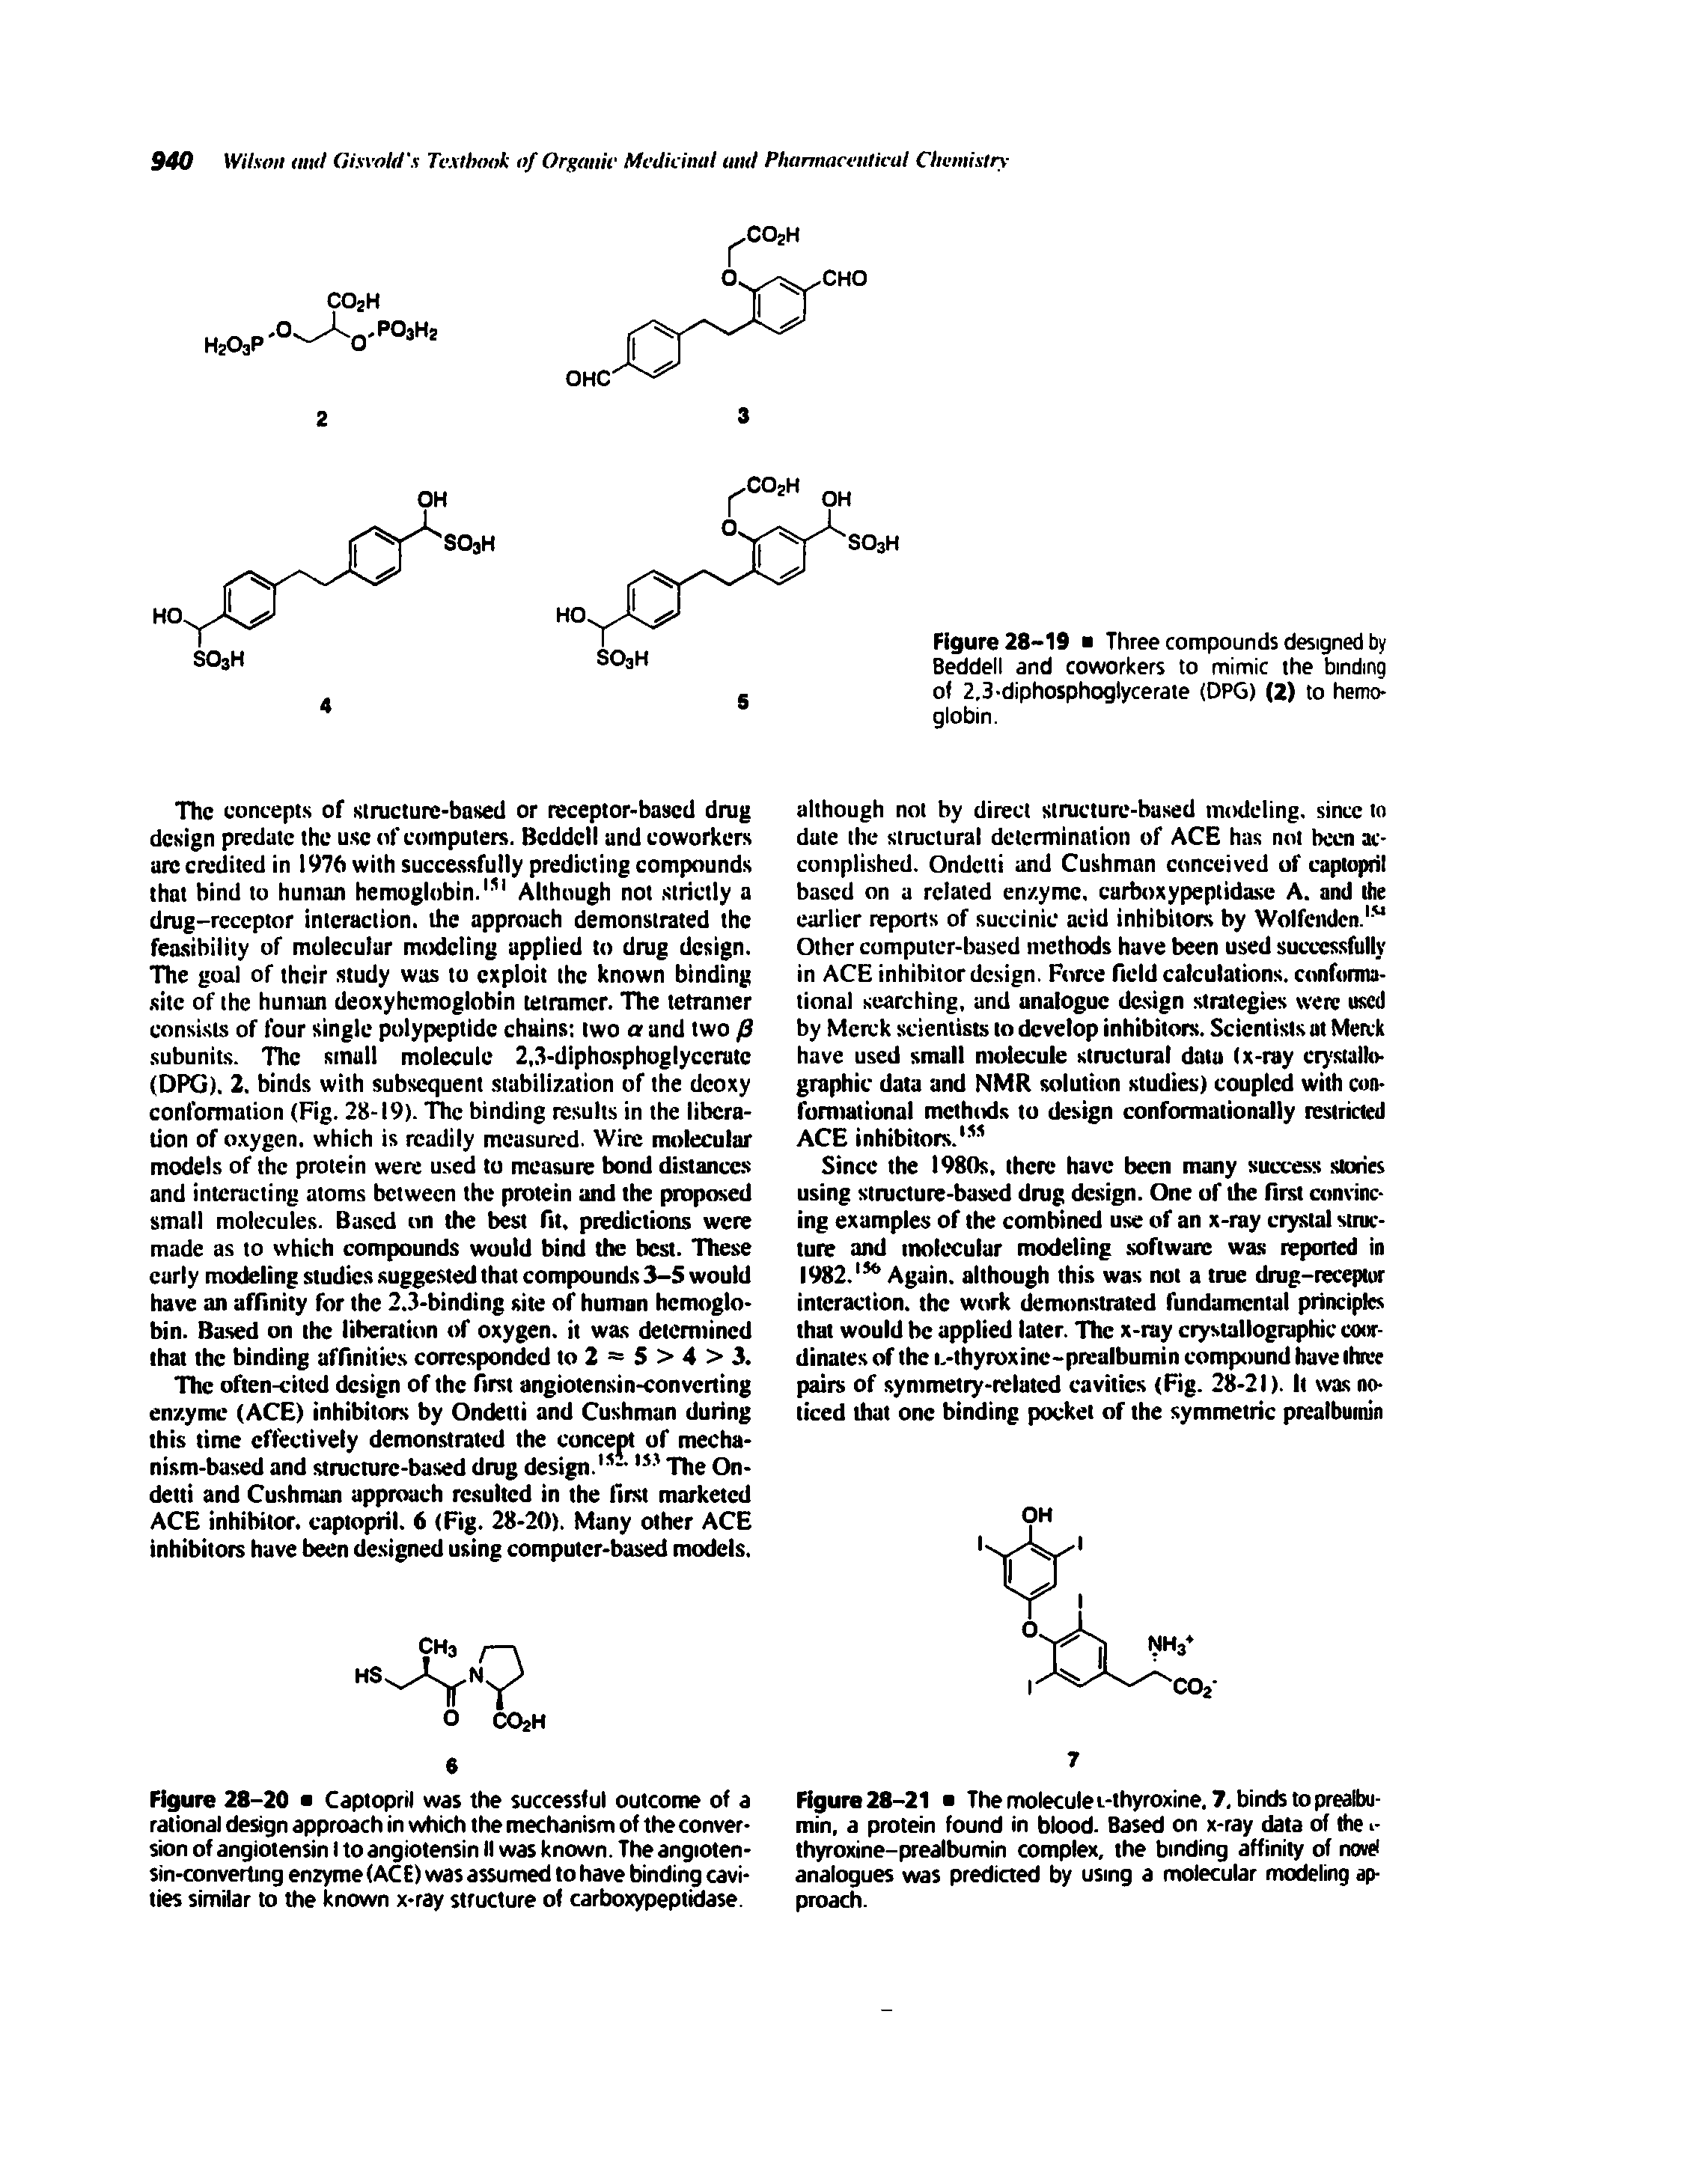 Figure 28-20 Captopril was the successful outcome of a rational design approach in which the mechanism of the conversion of angiotensin I to angiotensin II was known. The angiotensin-converting enzyme (ACE) was assumed to have binding cavities similar to the known x-ray structure of carboxypeptidase.